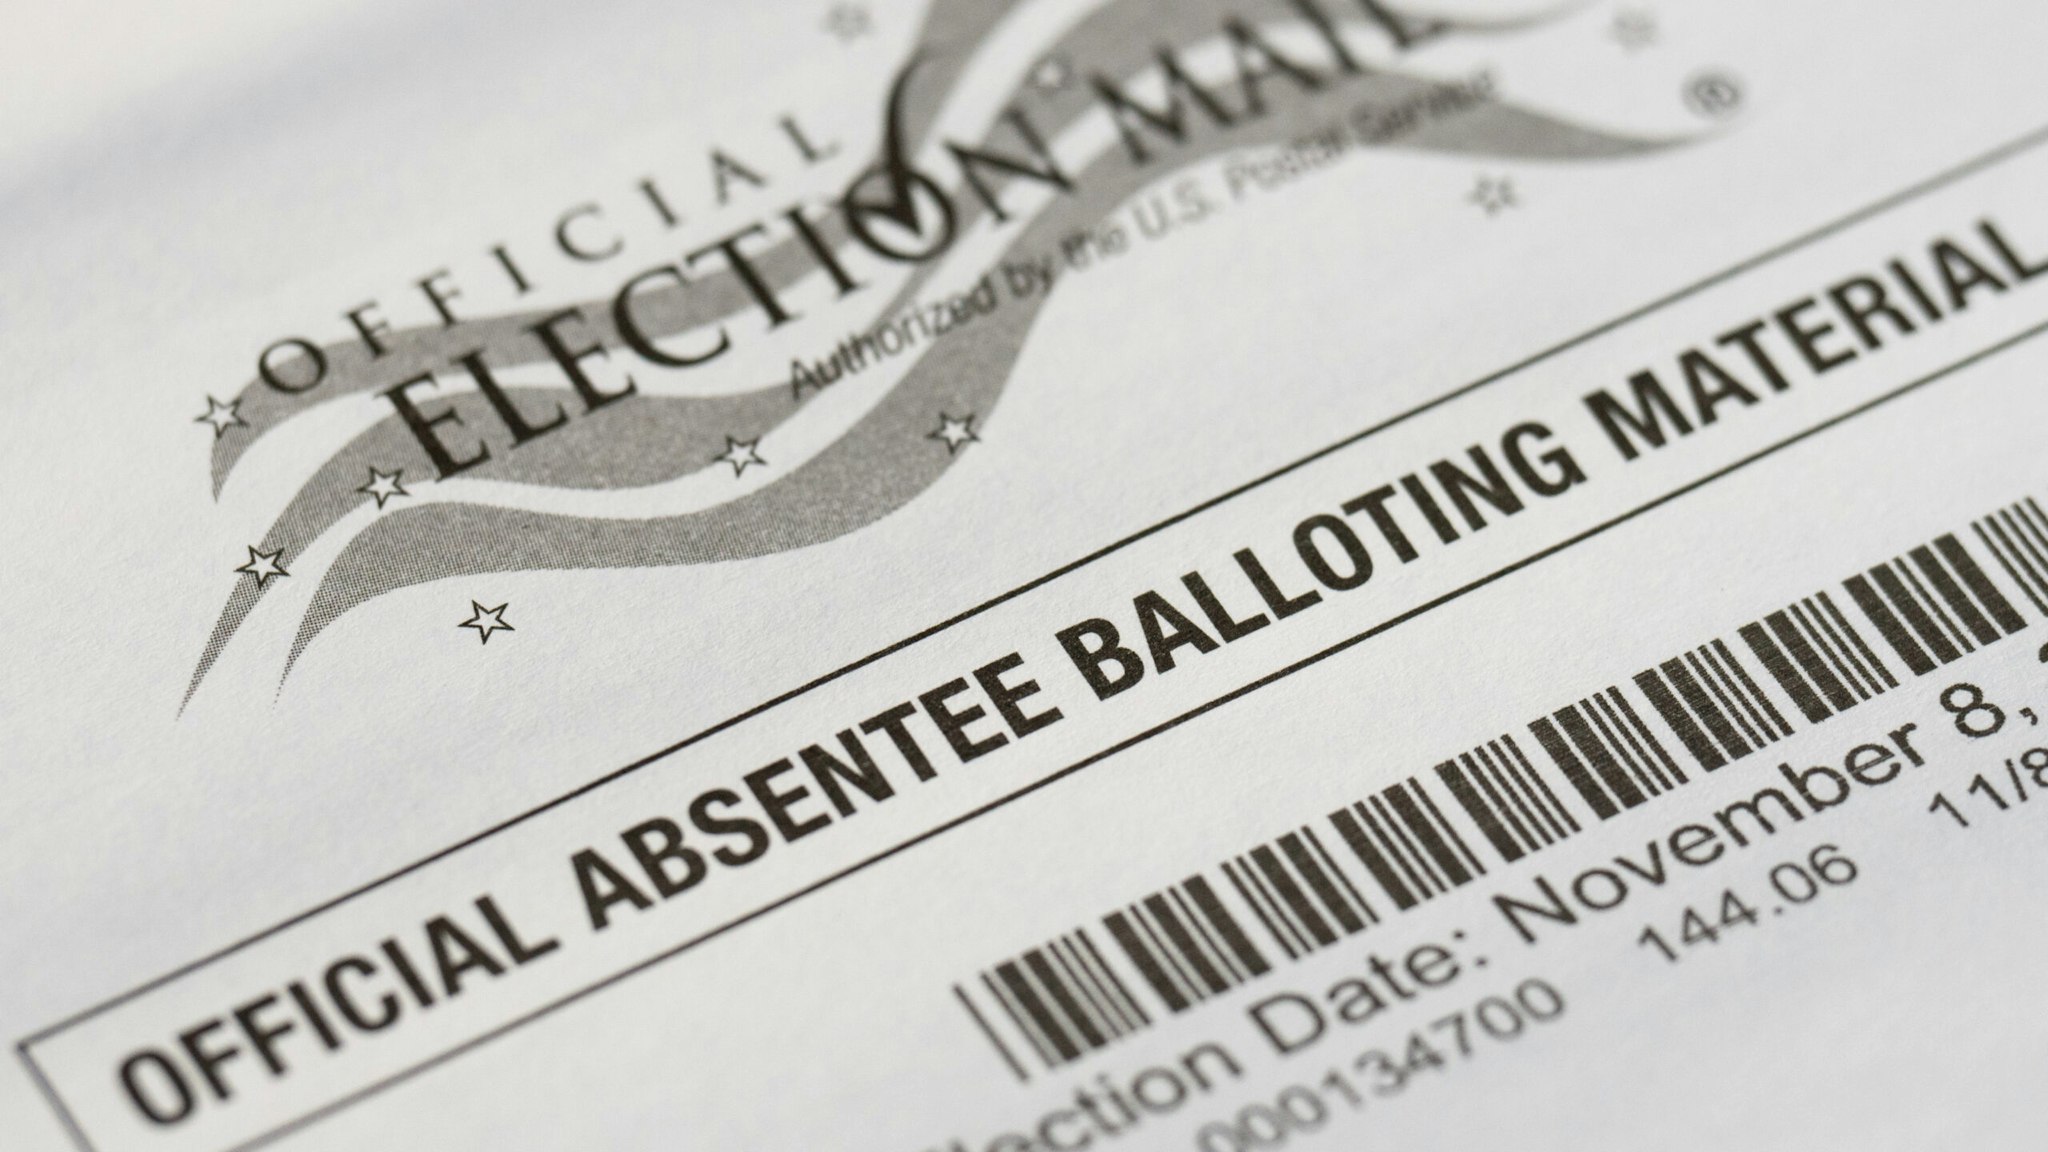 Official absentee ballot issued in Washington, DC on Tuesday, October 11, 2022.